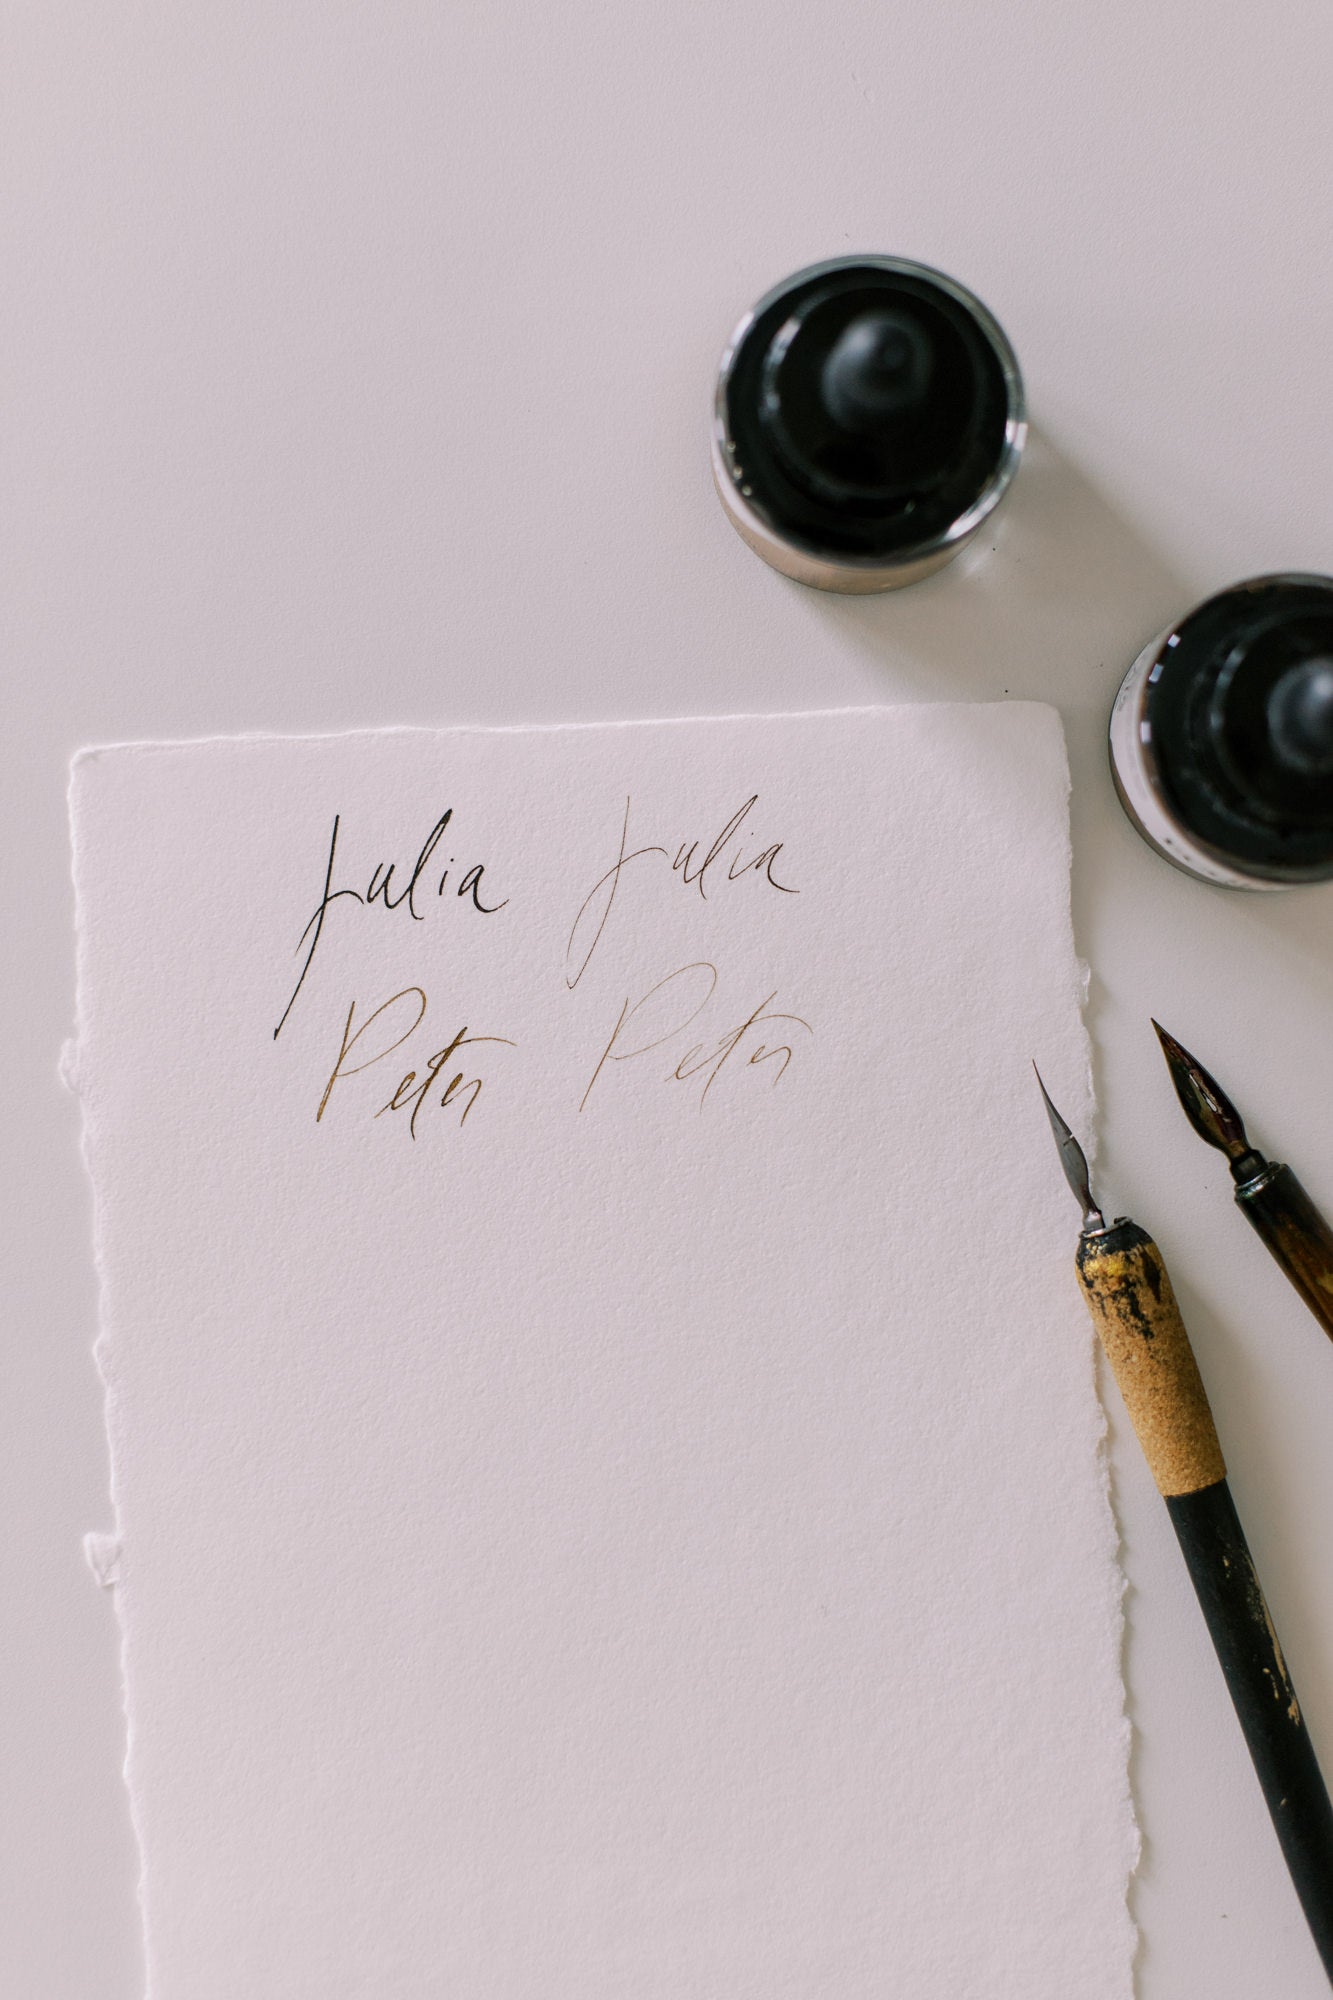 If you're looking for a subtle and elegant effect on your handmade paper, TALENS Ecoline Liquid Watercolour inks are the perfect choice. Our guide will show you how these inks interact with the paper's texture to create a soft and subtle effect that's sure to impress. Plus, their bright and blendable formula makes them a joy to use.